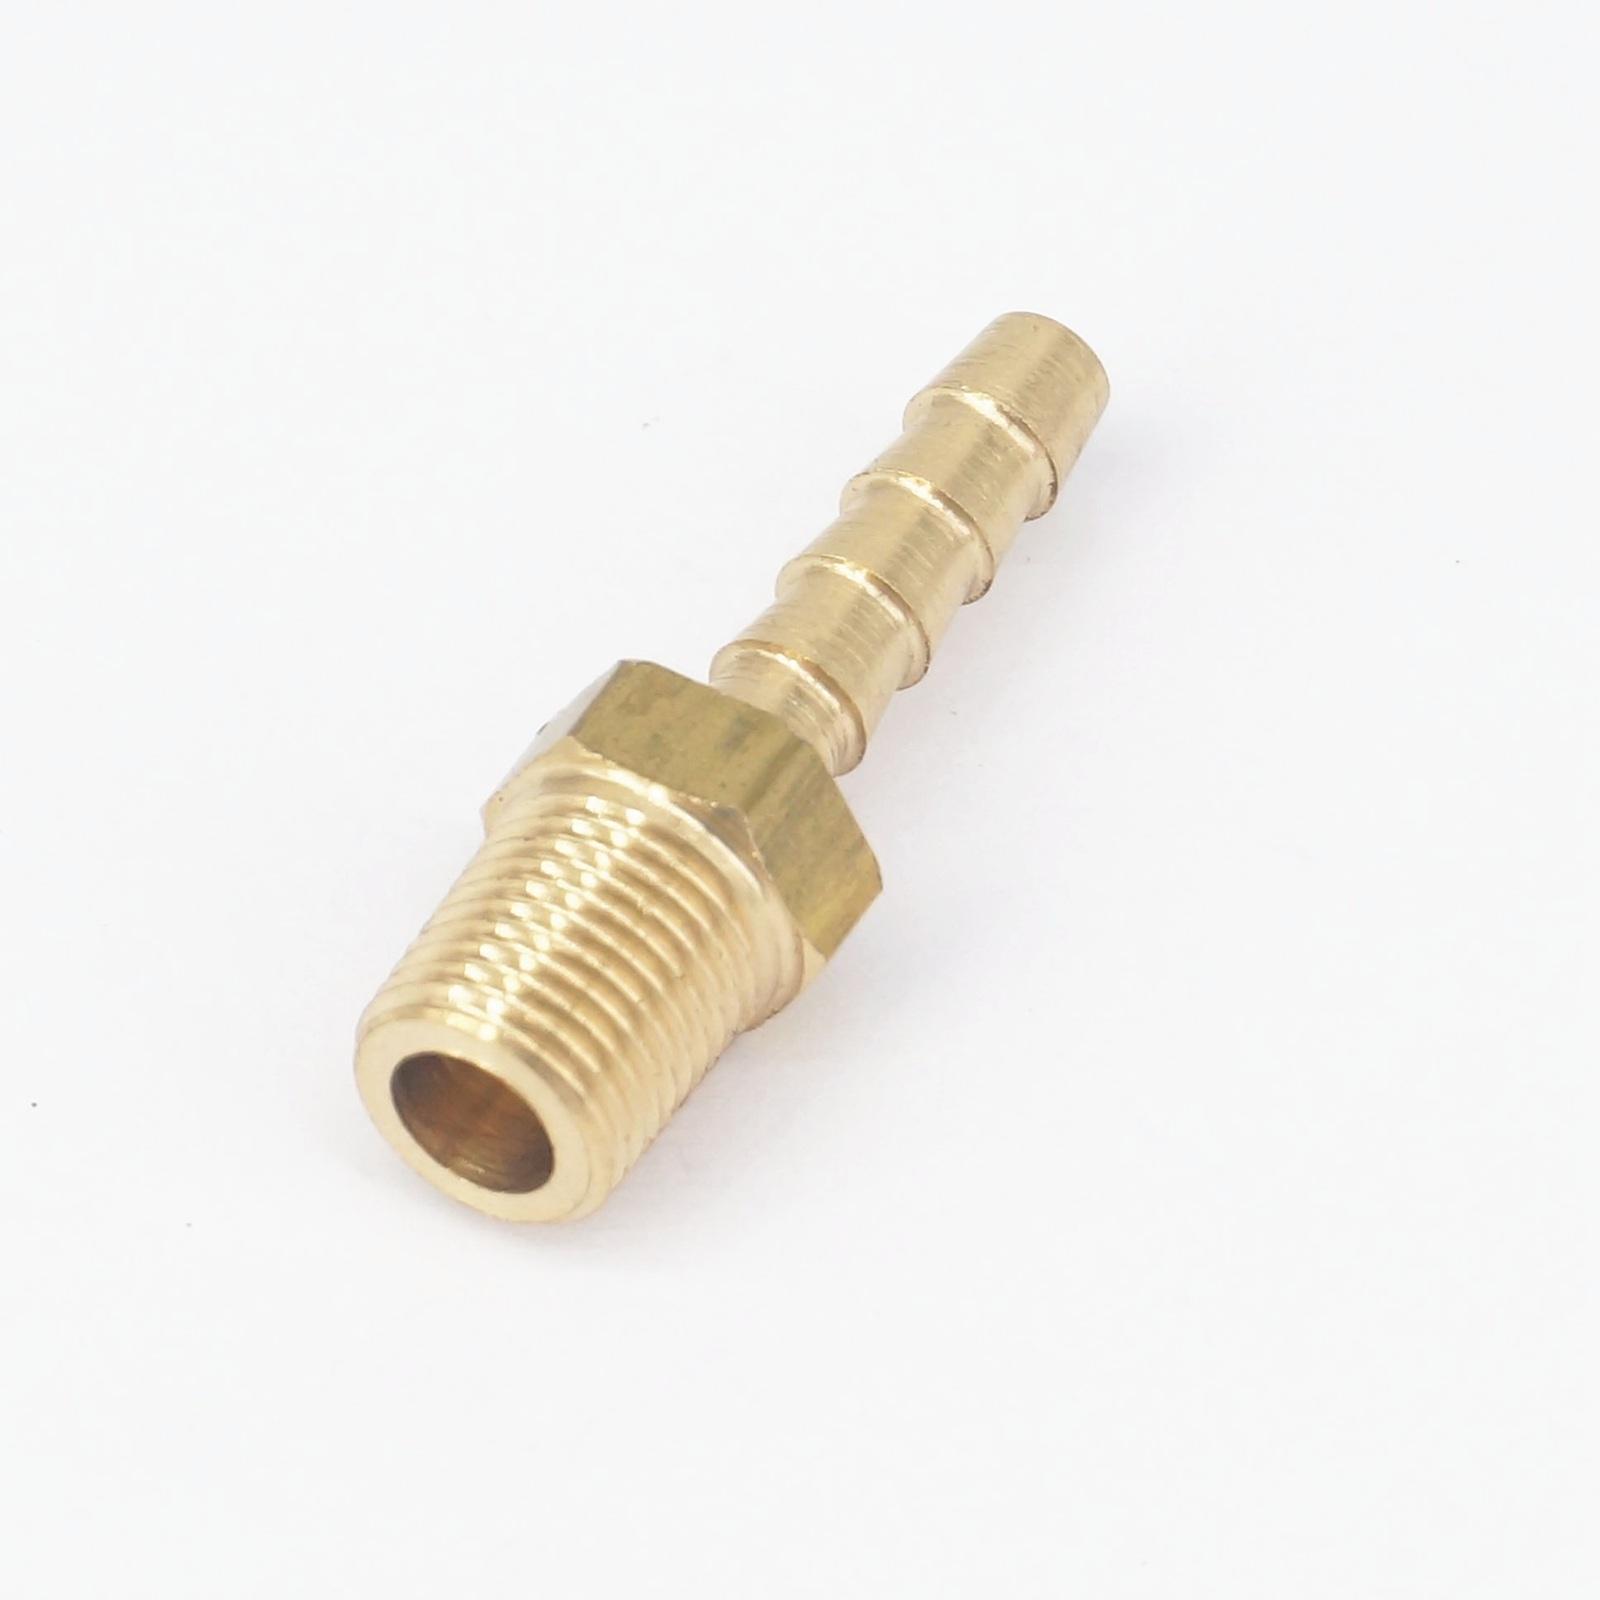 1/4" NPT Female x 5/16" Hose Barb Tail Brass Fuel Fitting Connector 229 PSI 